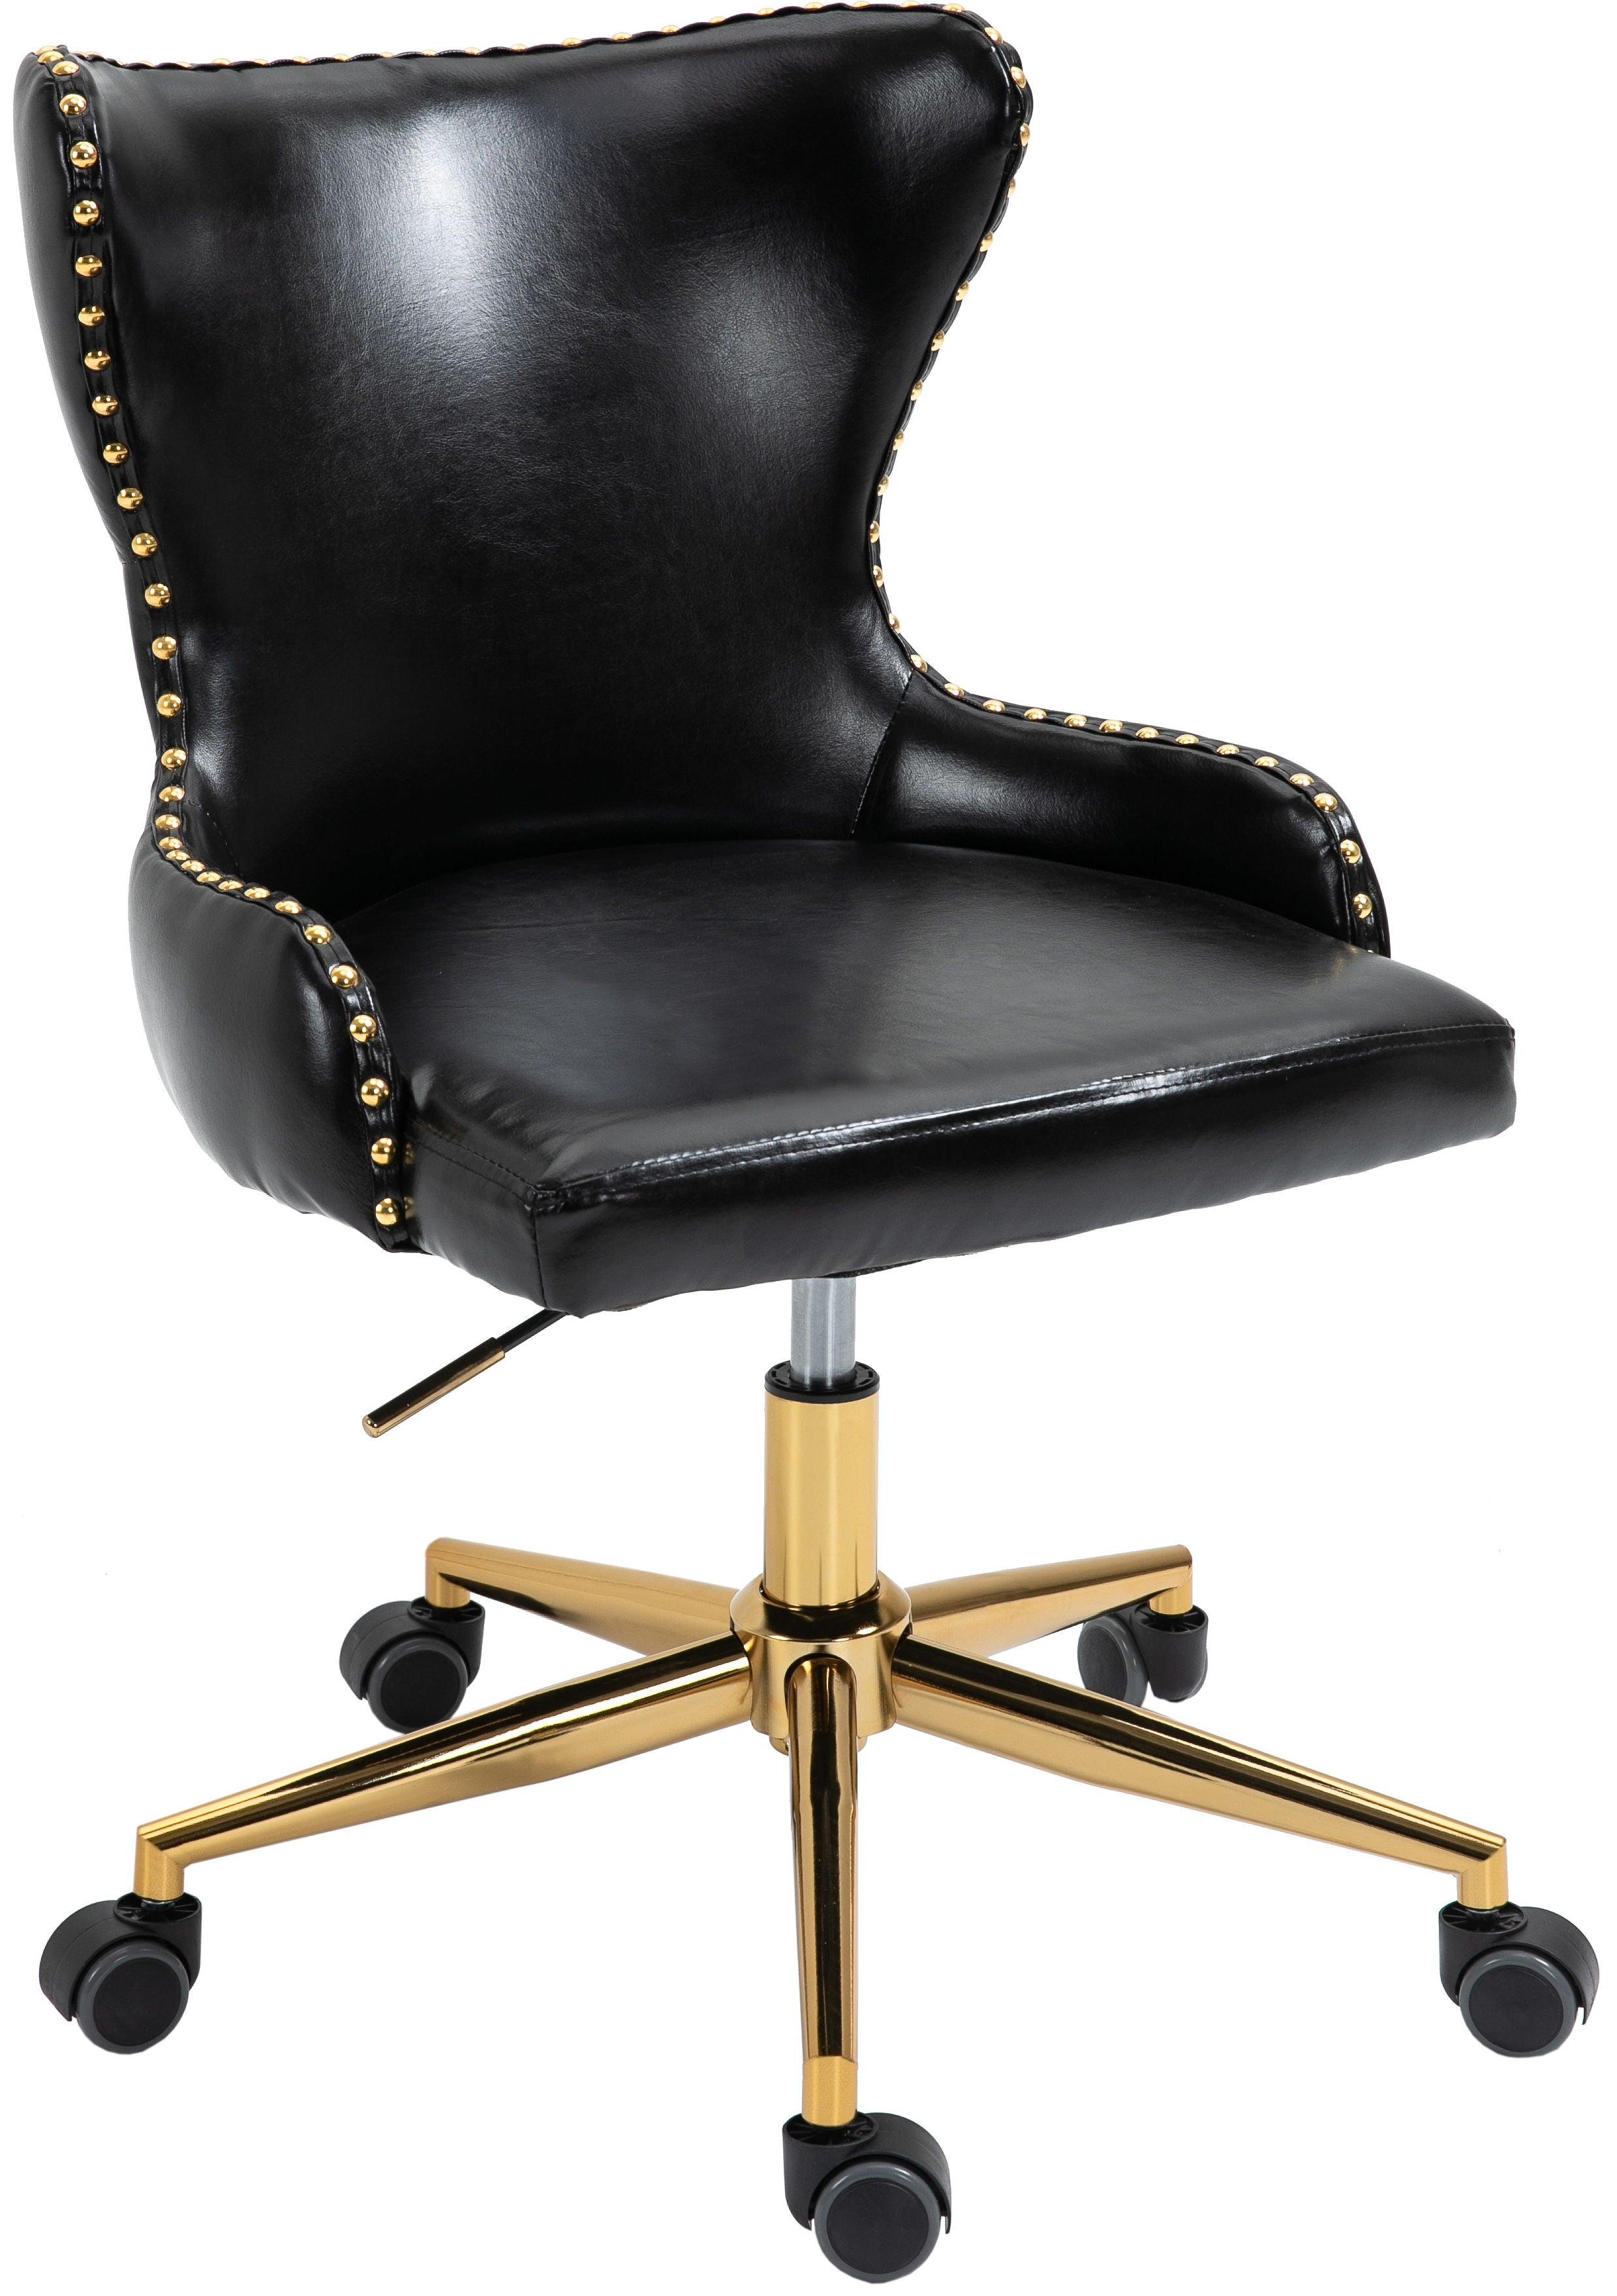 Meridian Furniture - Hendrix - Office Chair with Gold Legs - 5th Avenue Furniture